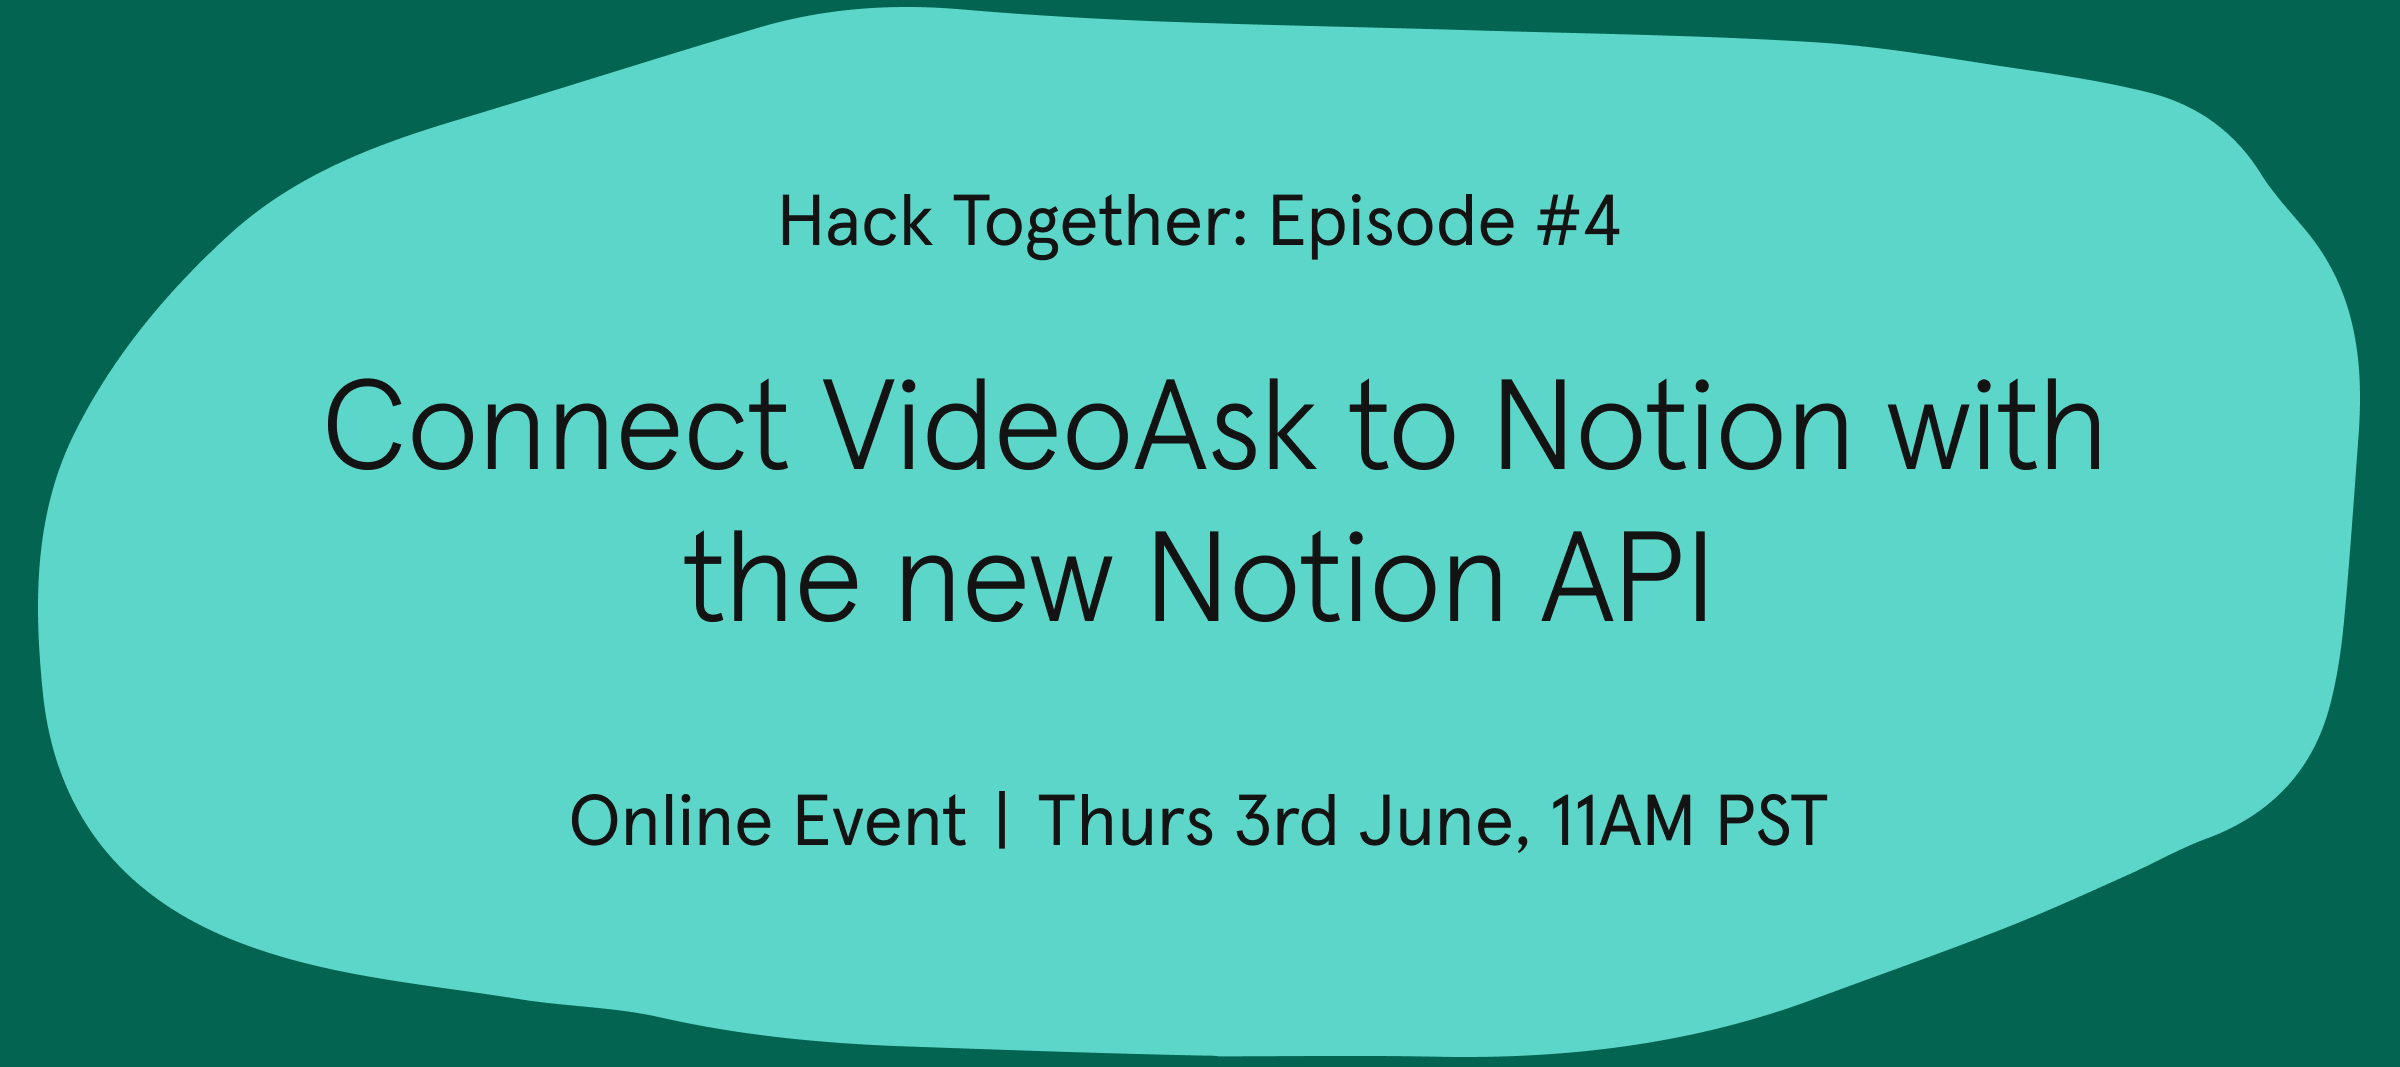 Hack Together: Episode #4 – Connect VideoAsk to Notion with the new Notion API